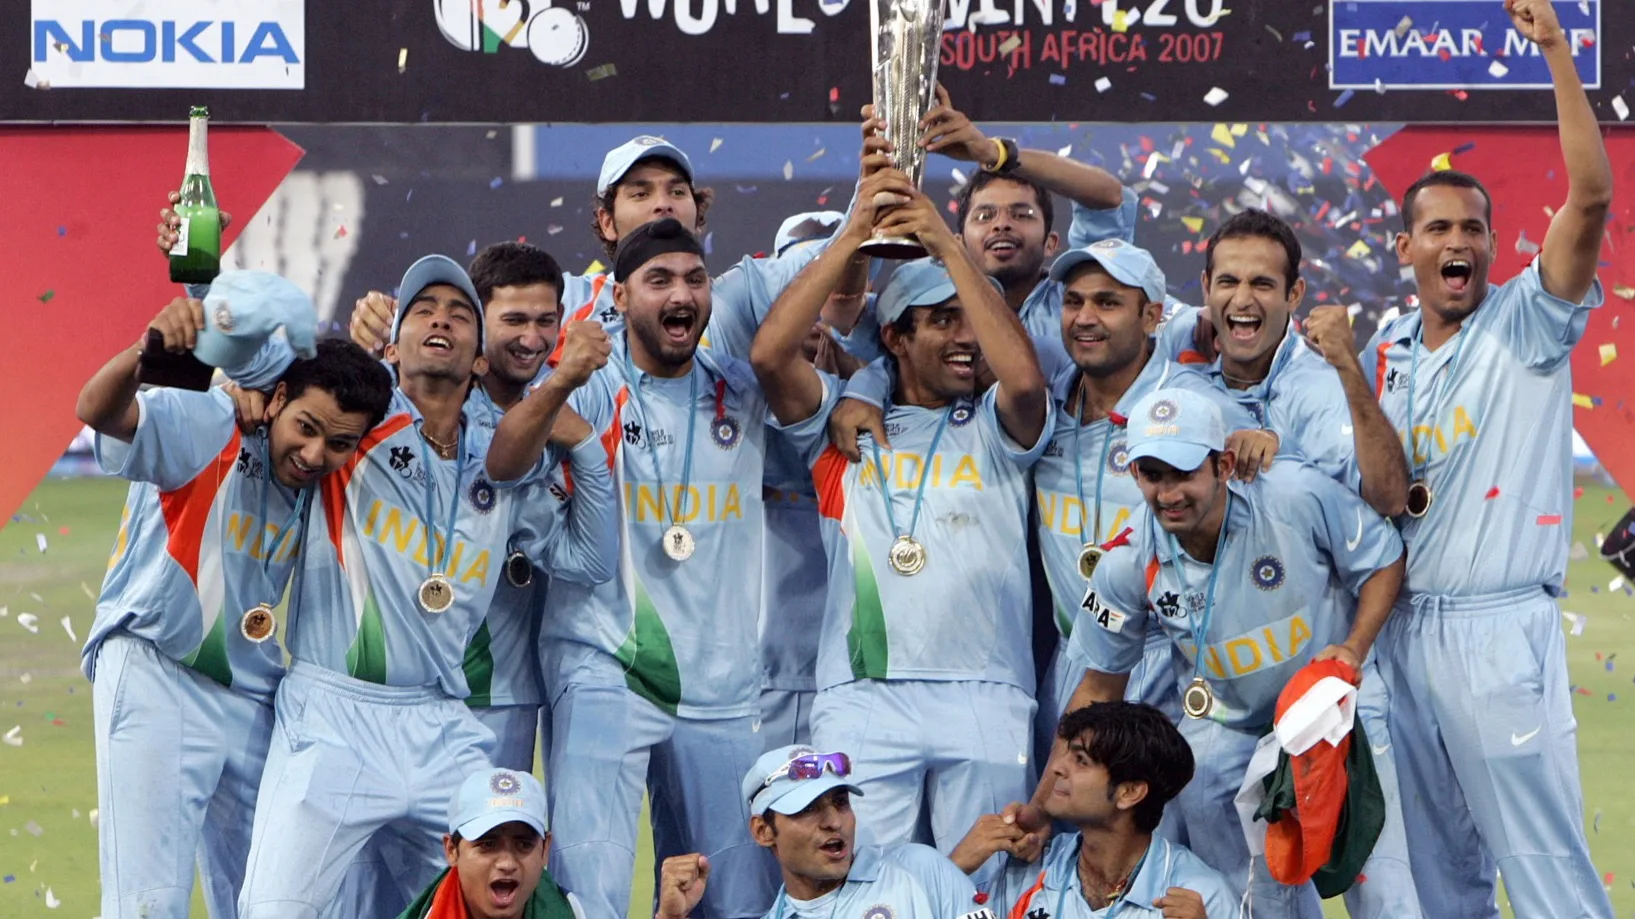 Find out which country won the first T20 World Cup